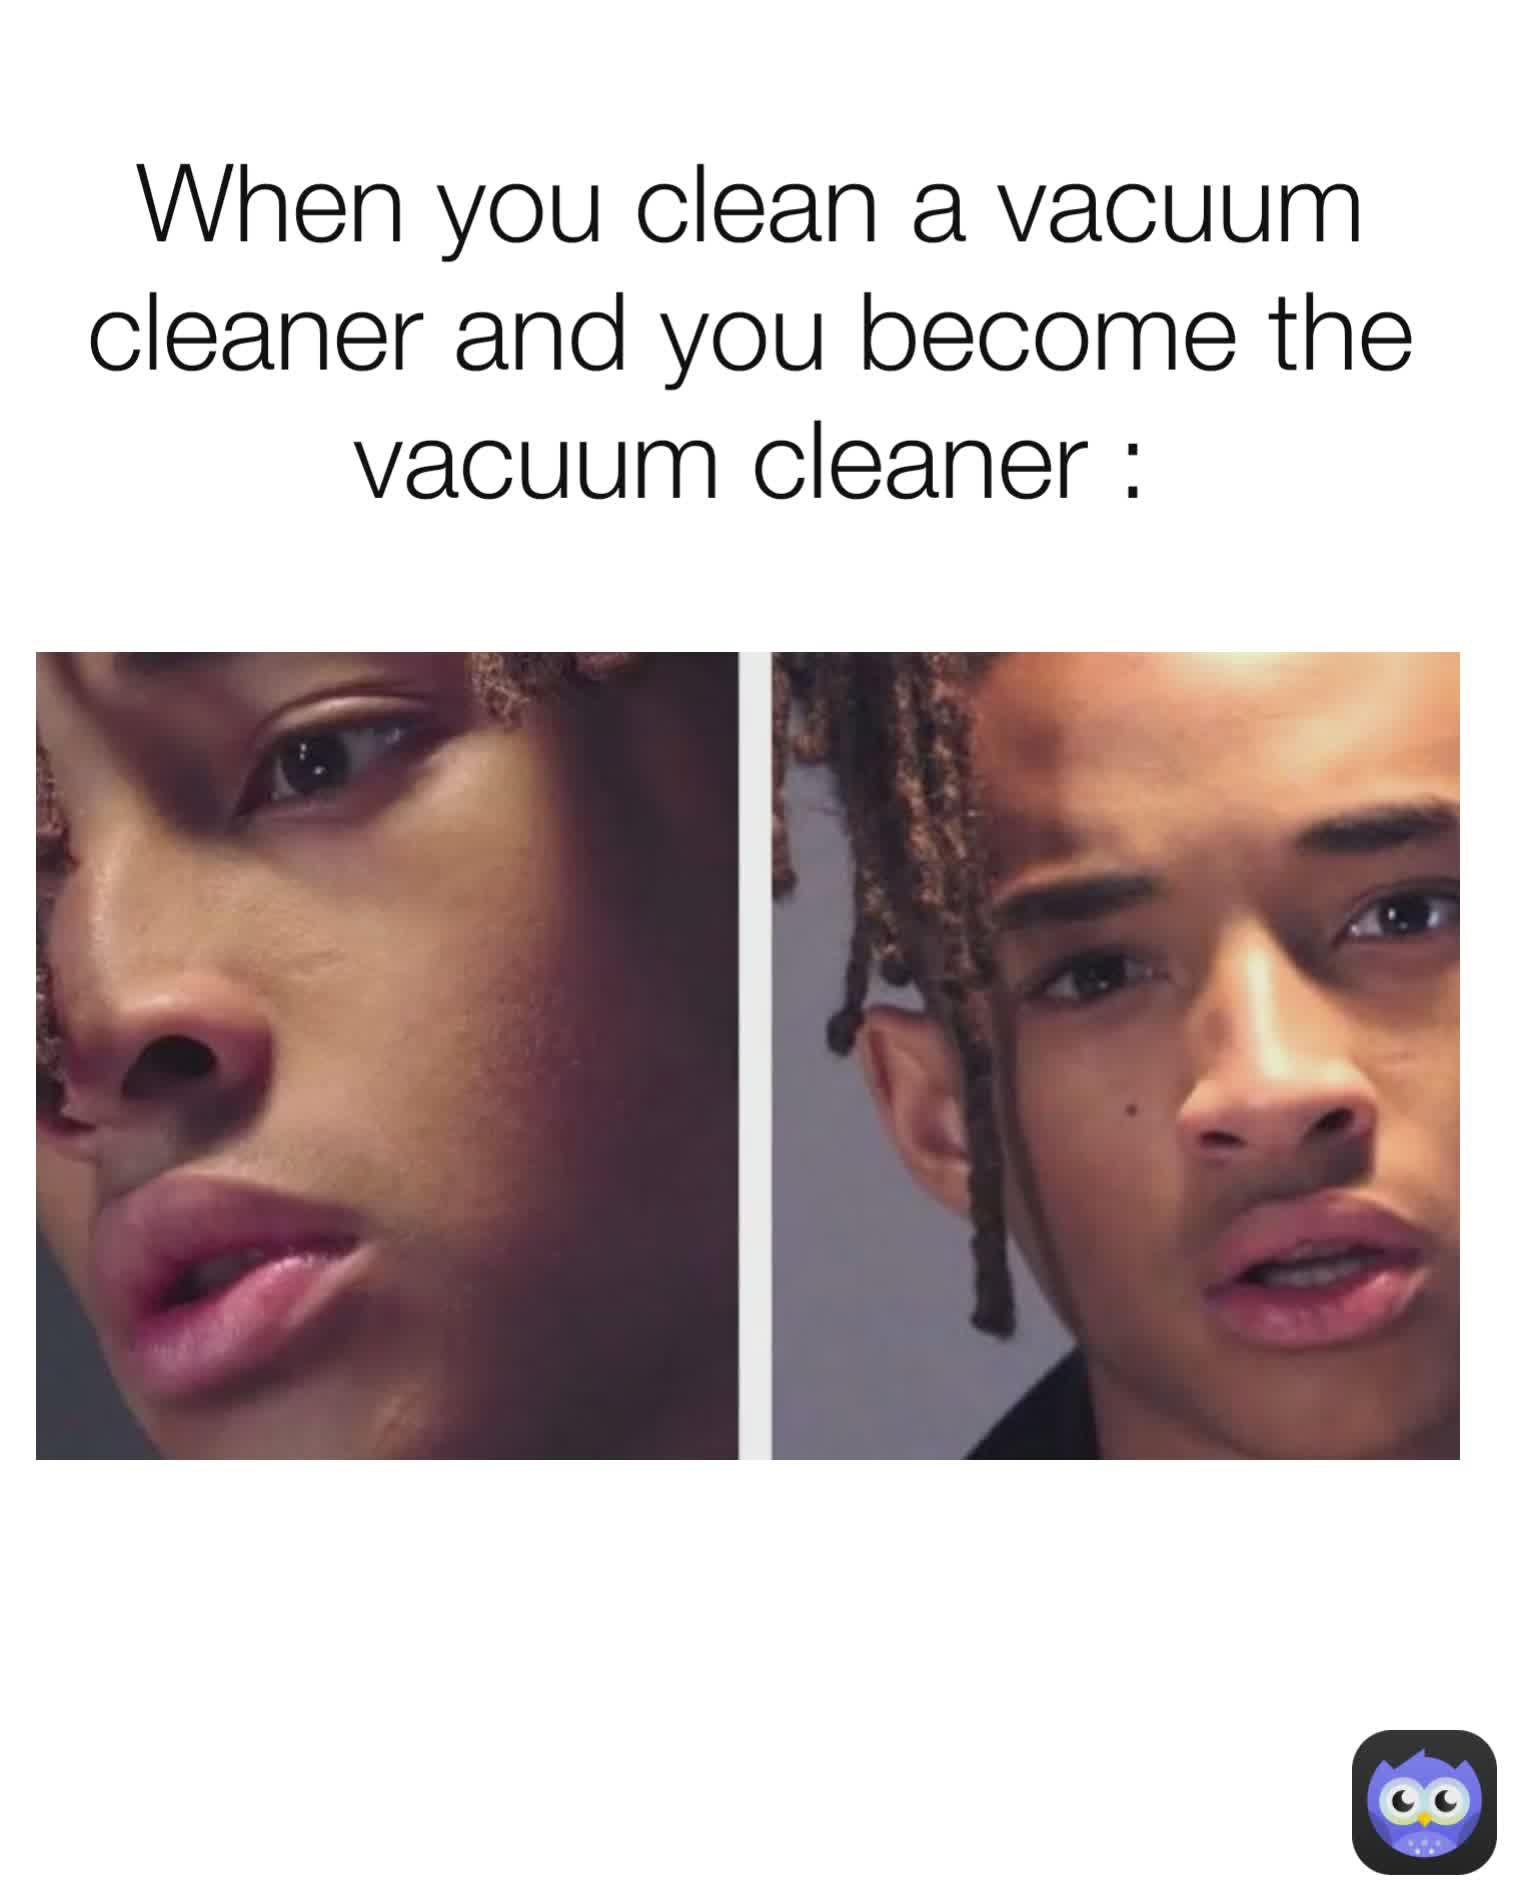 When you clean a vacuum cleaner and you become the vacuum cleaner :